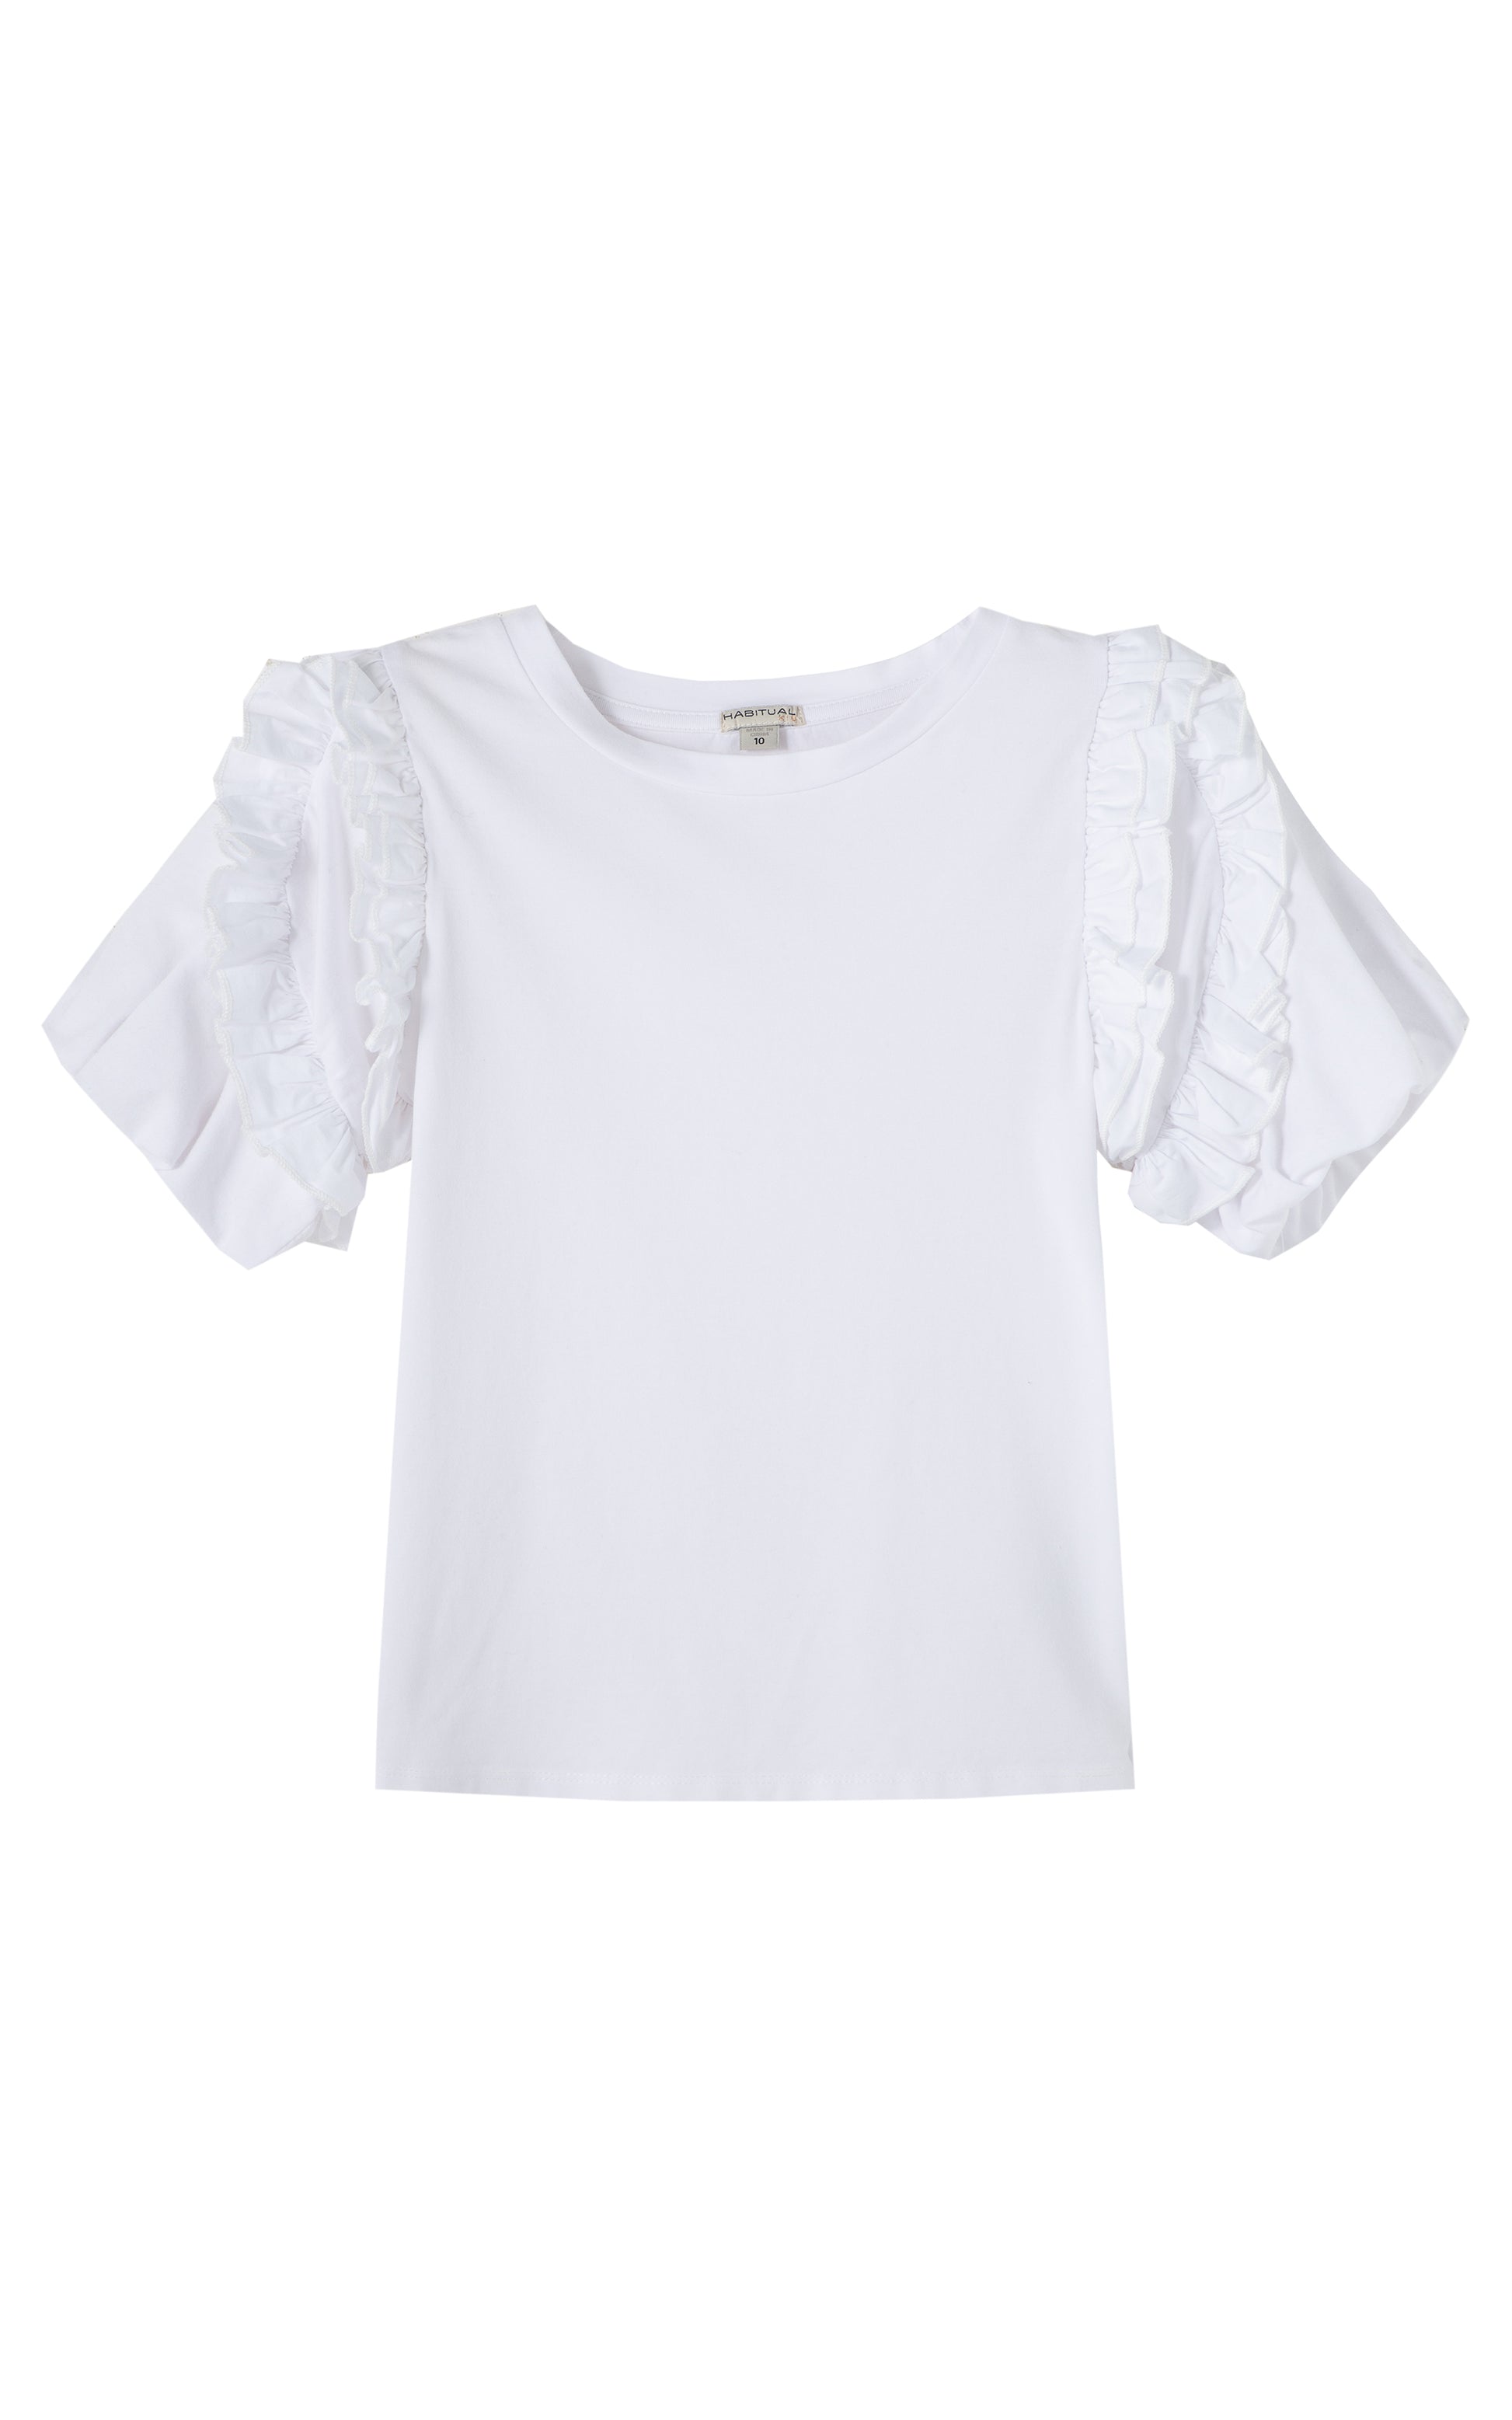 WHITE T-SHIRT WITH PLEATED RUFFLED SLEEVES